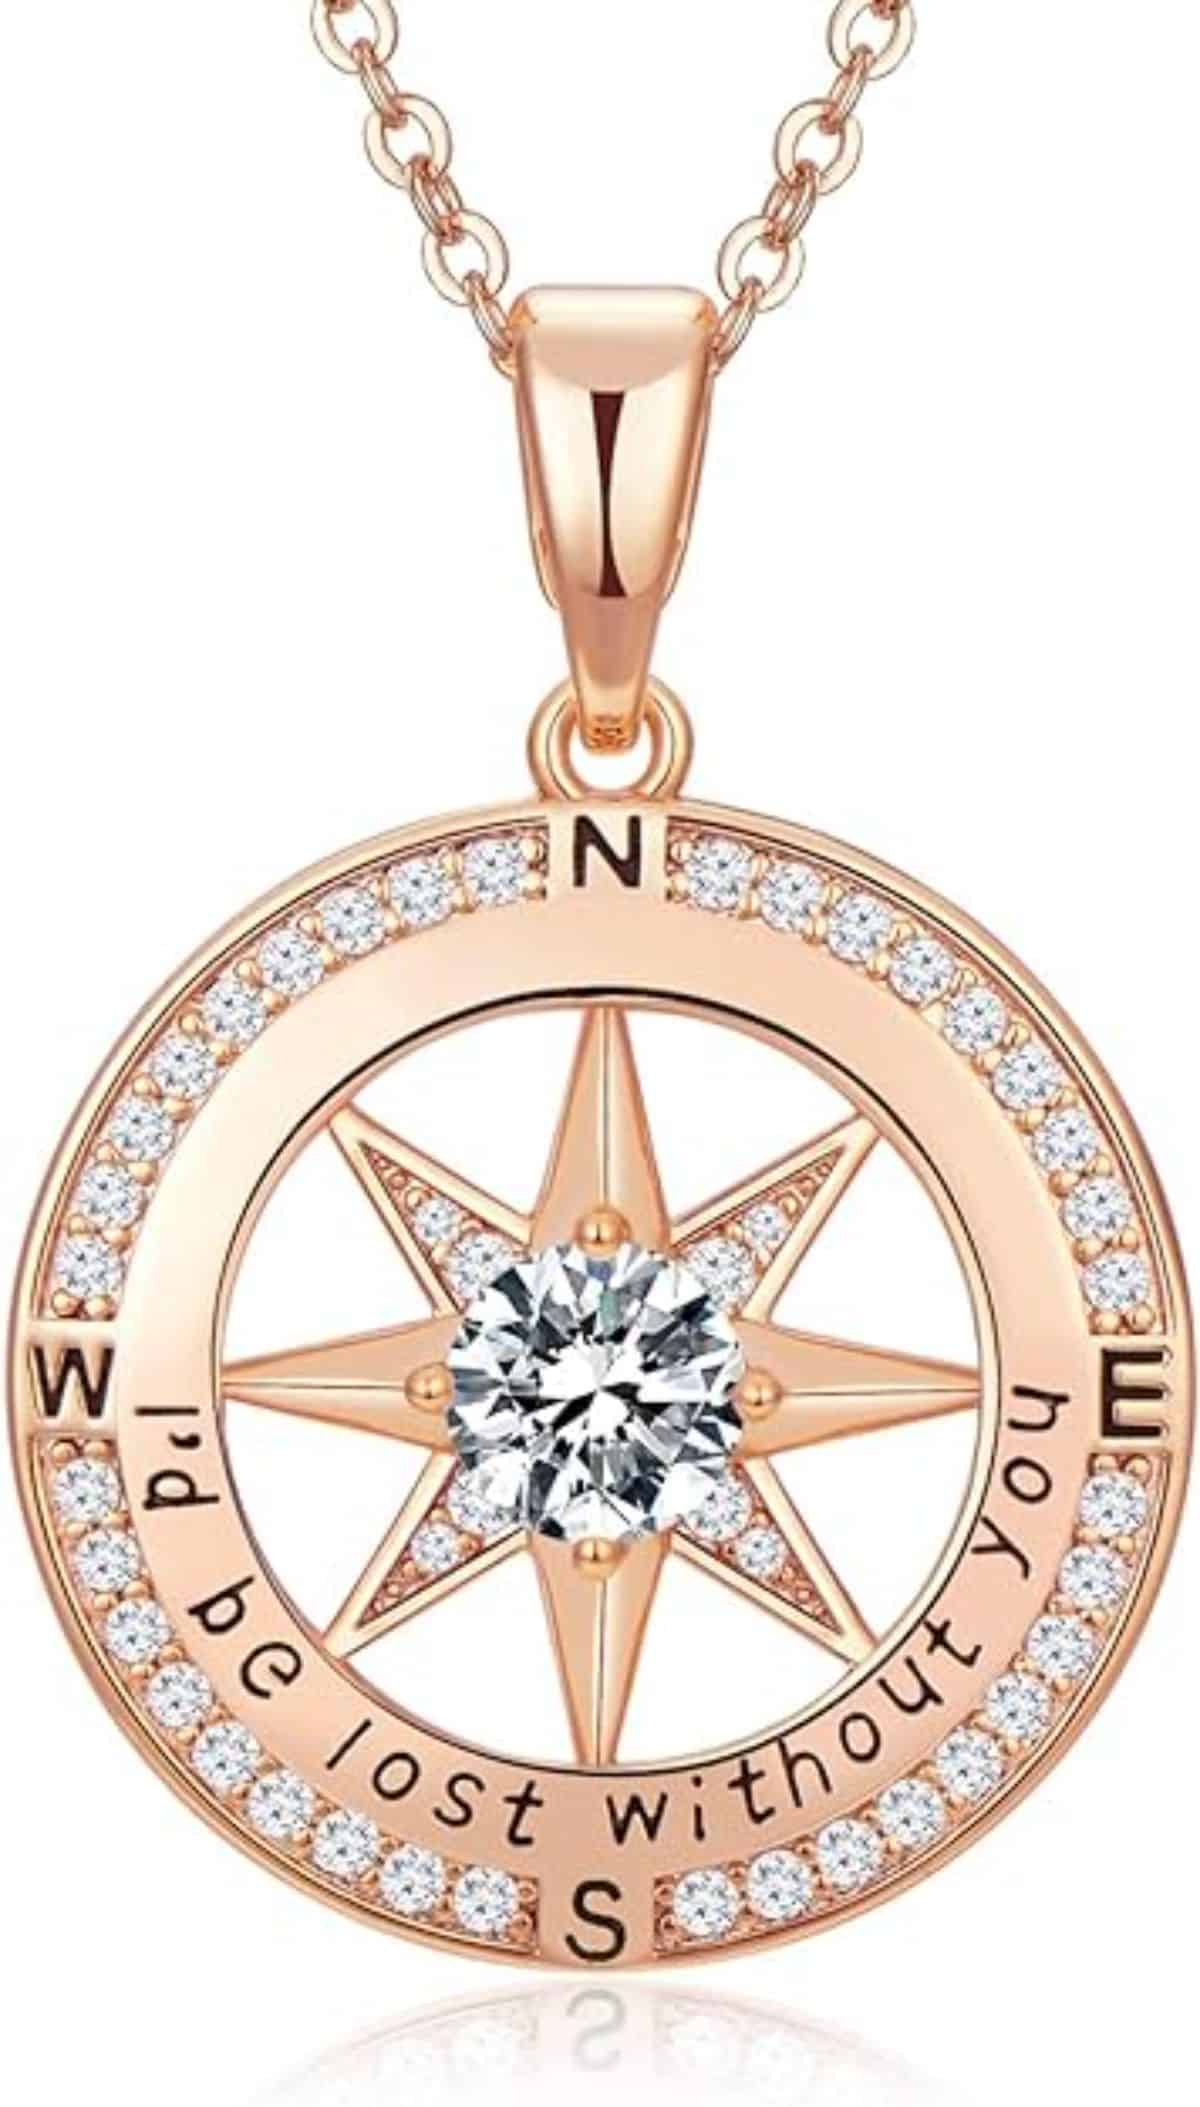 I'd Be Lost Without You Diamond Compass Pendant Jewelry